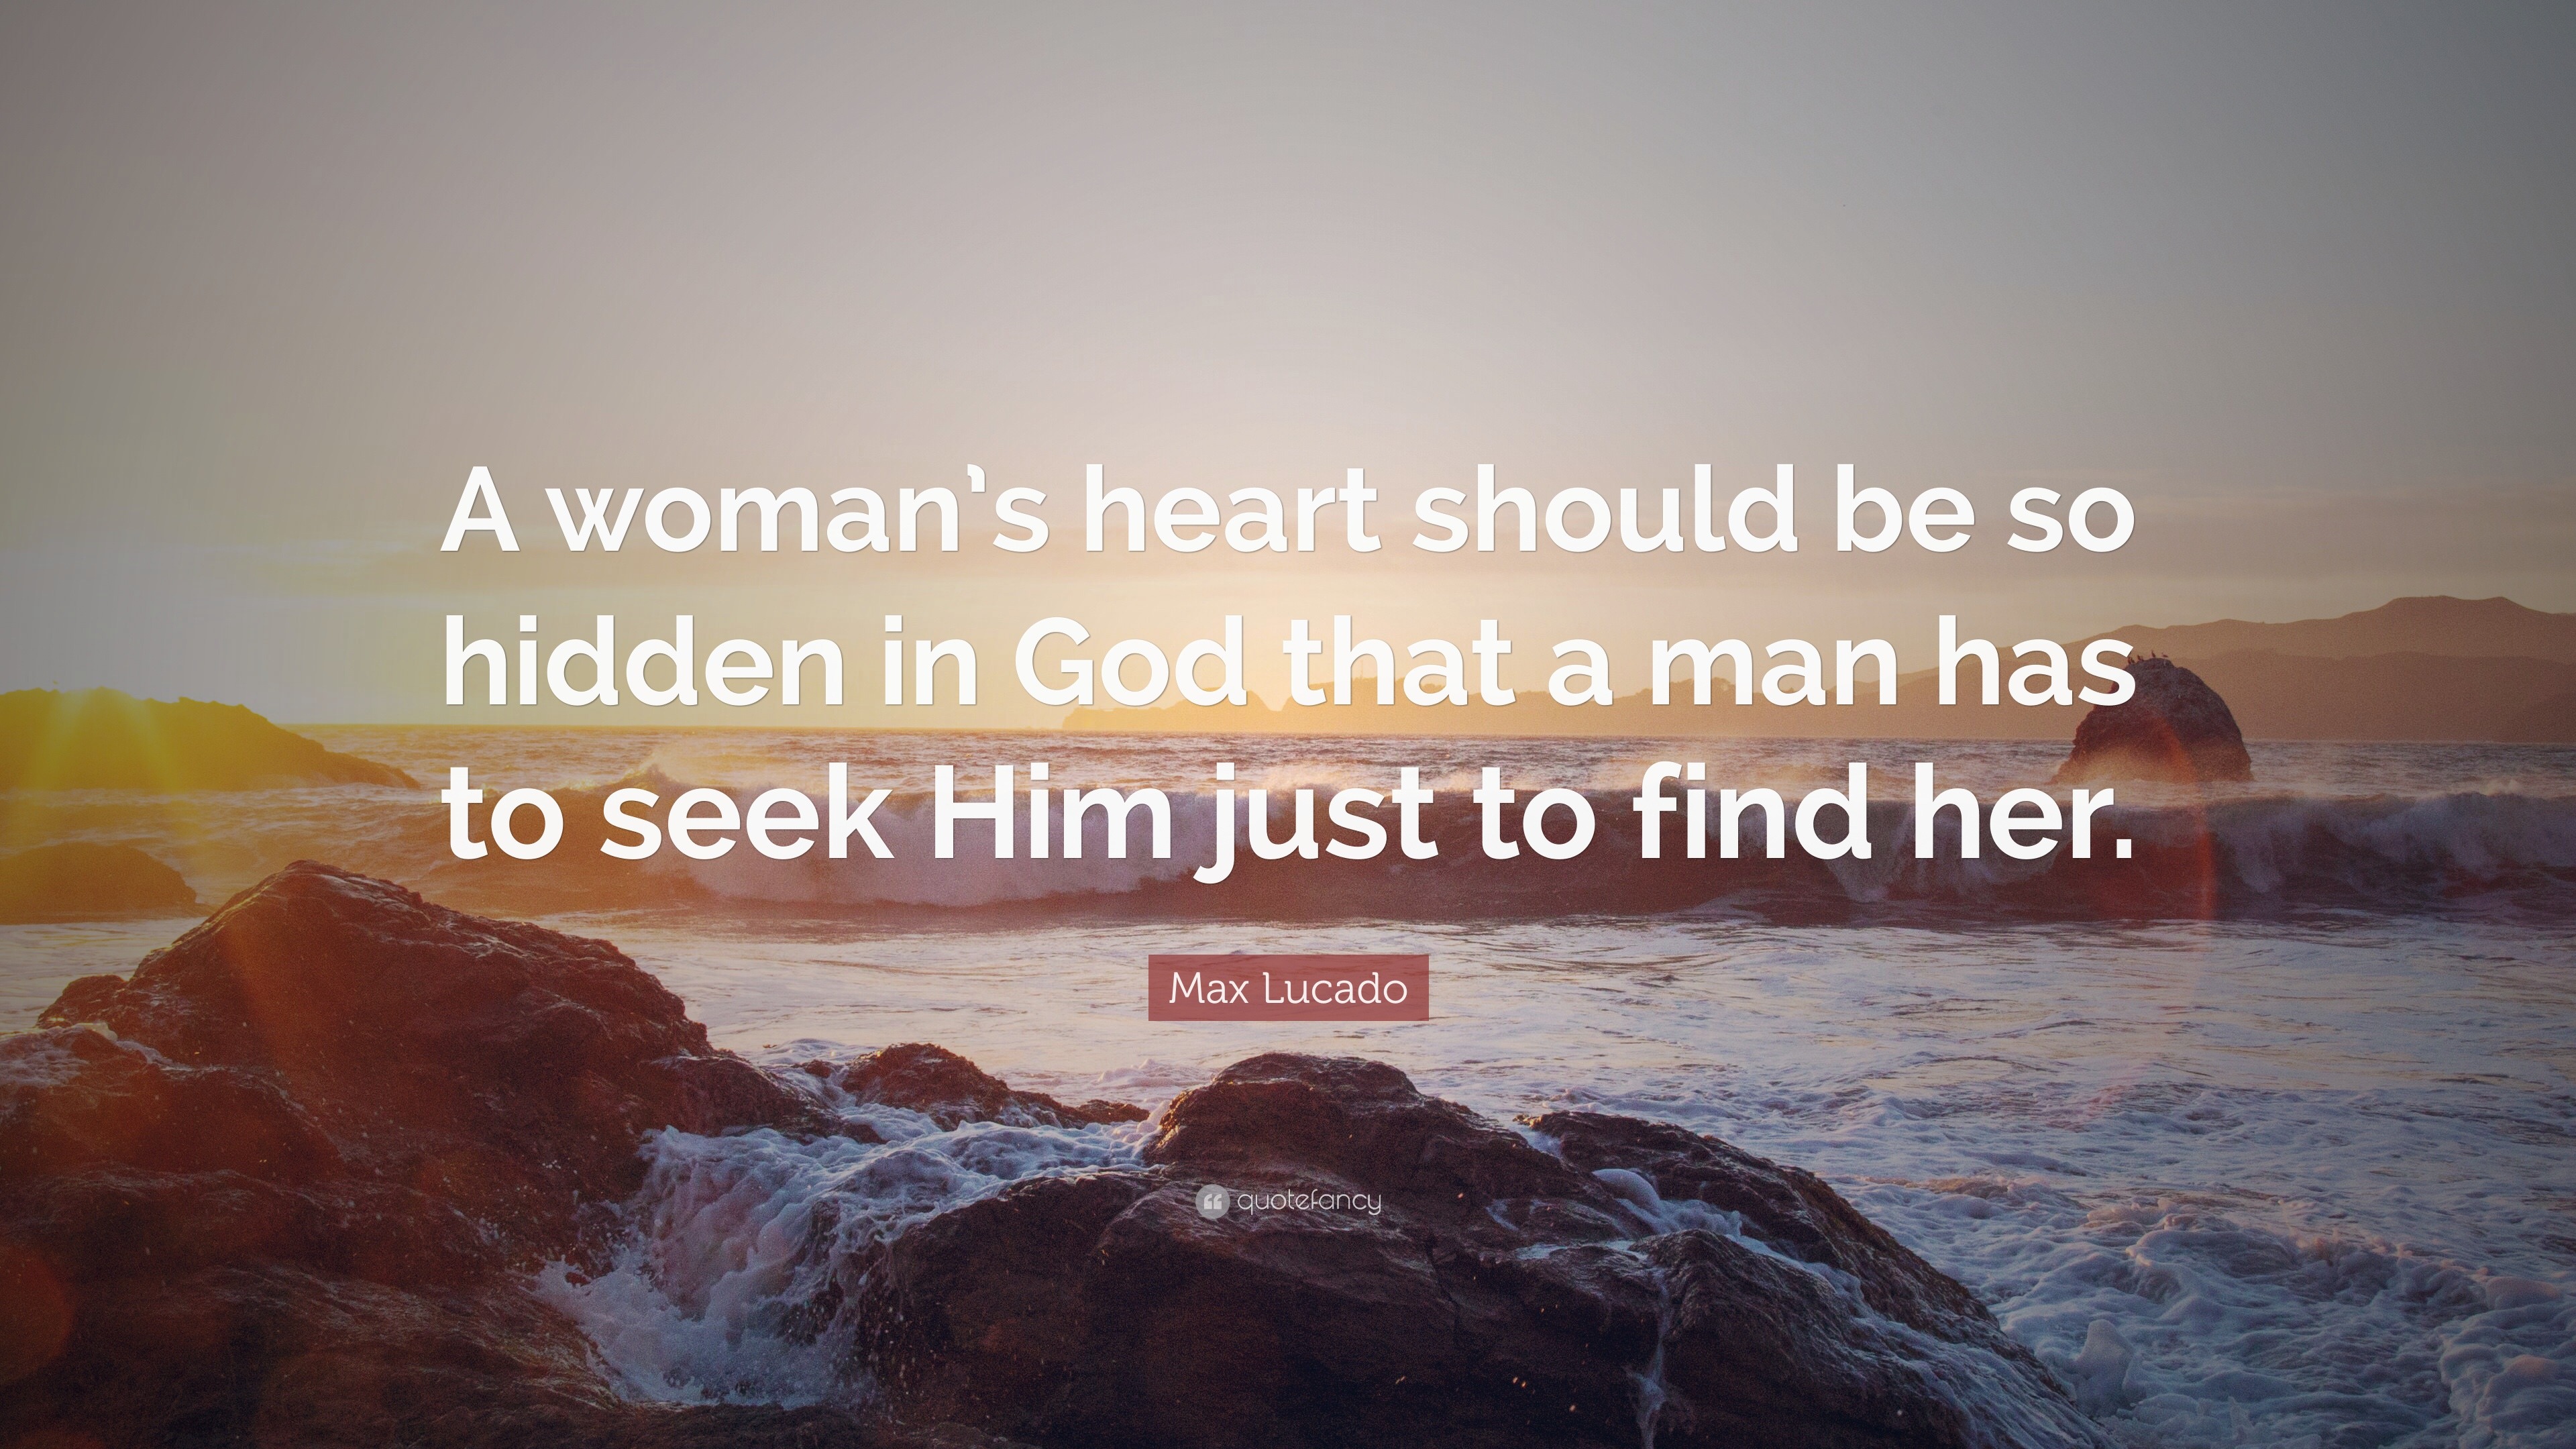 Max Lucado Quote: “A woman's heart should be so hidden in God that